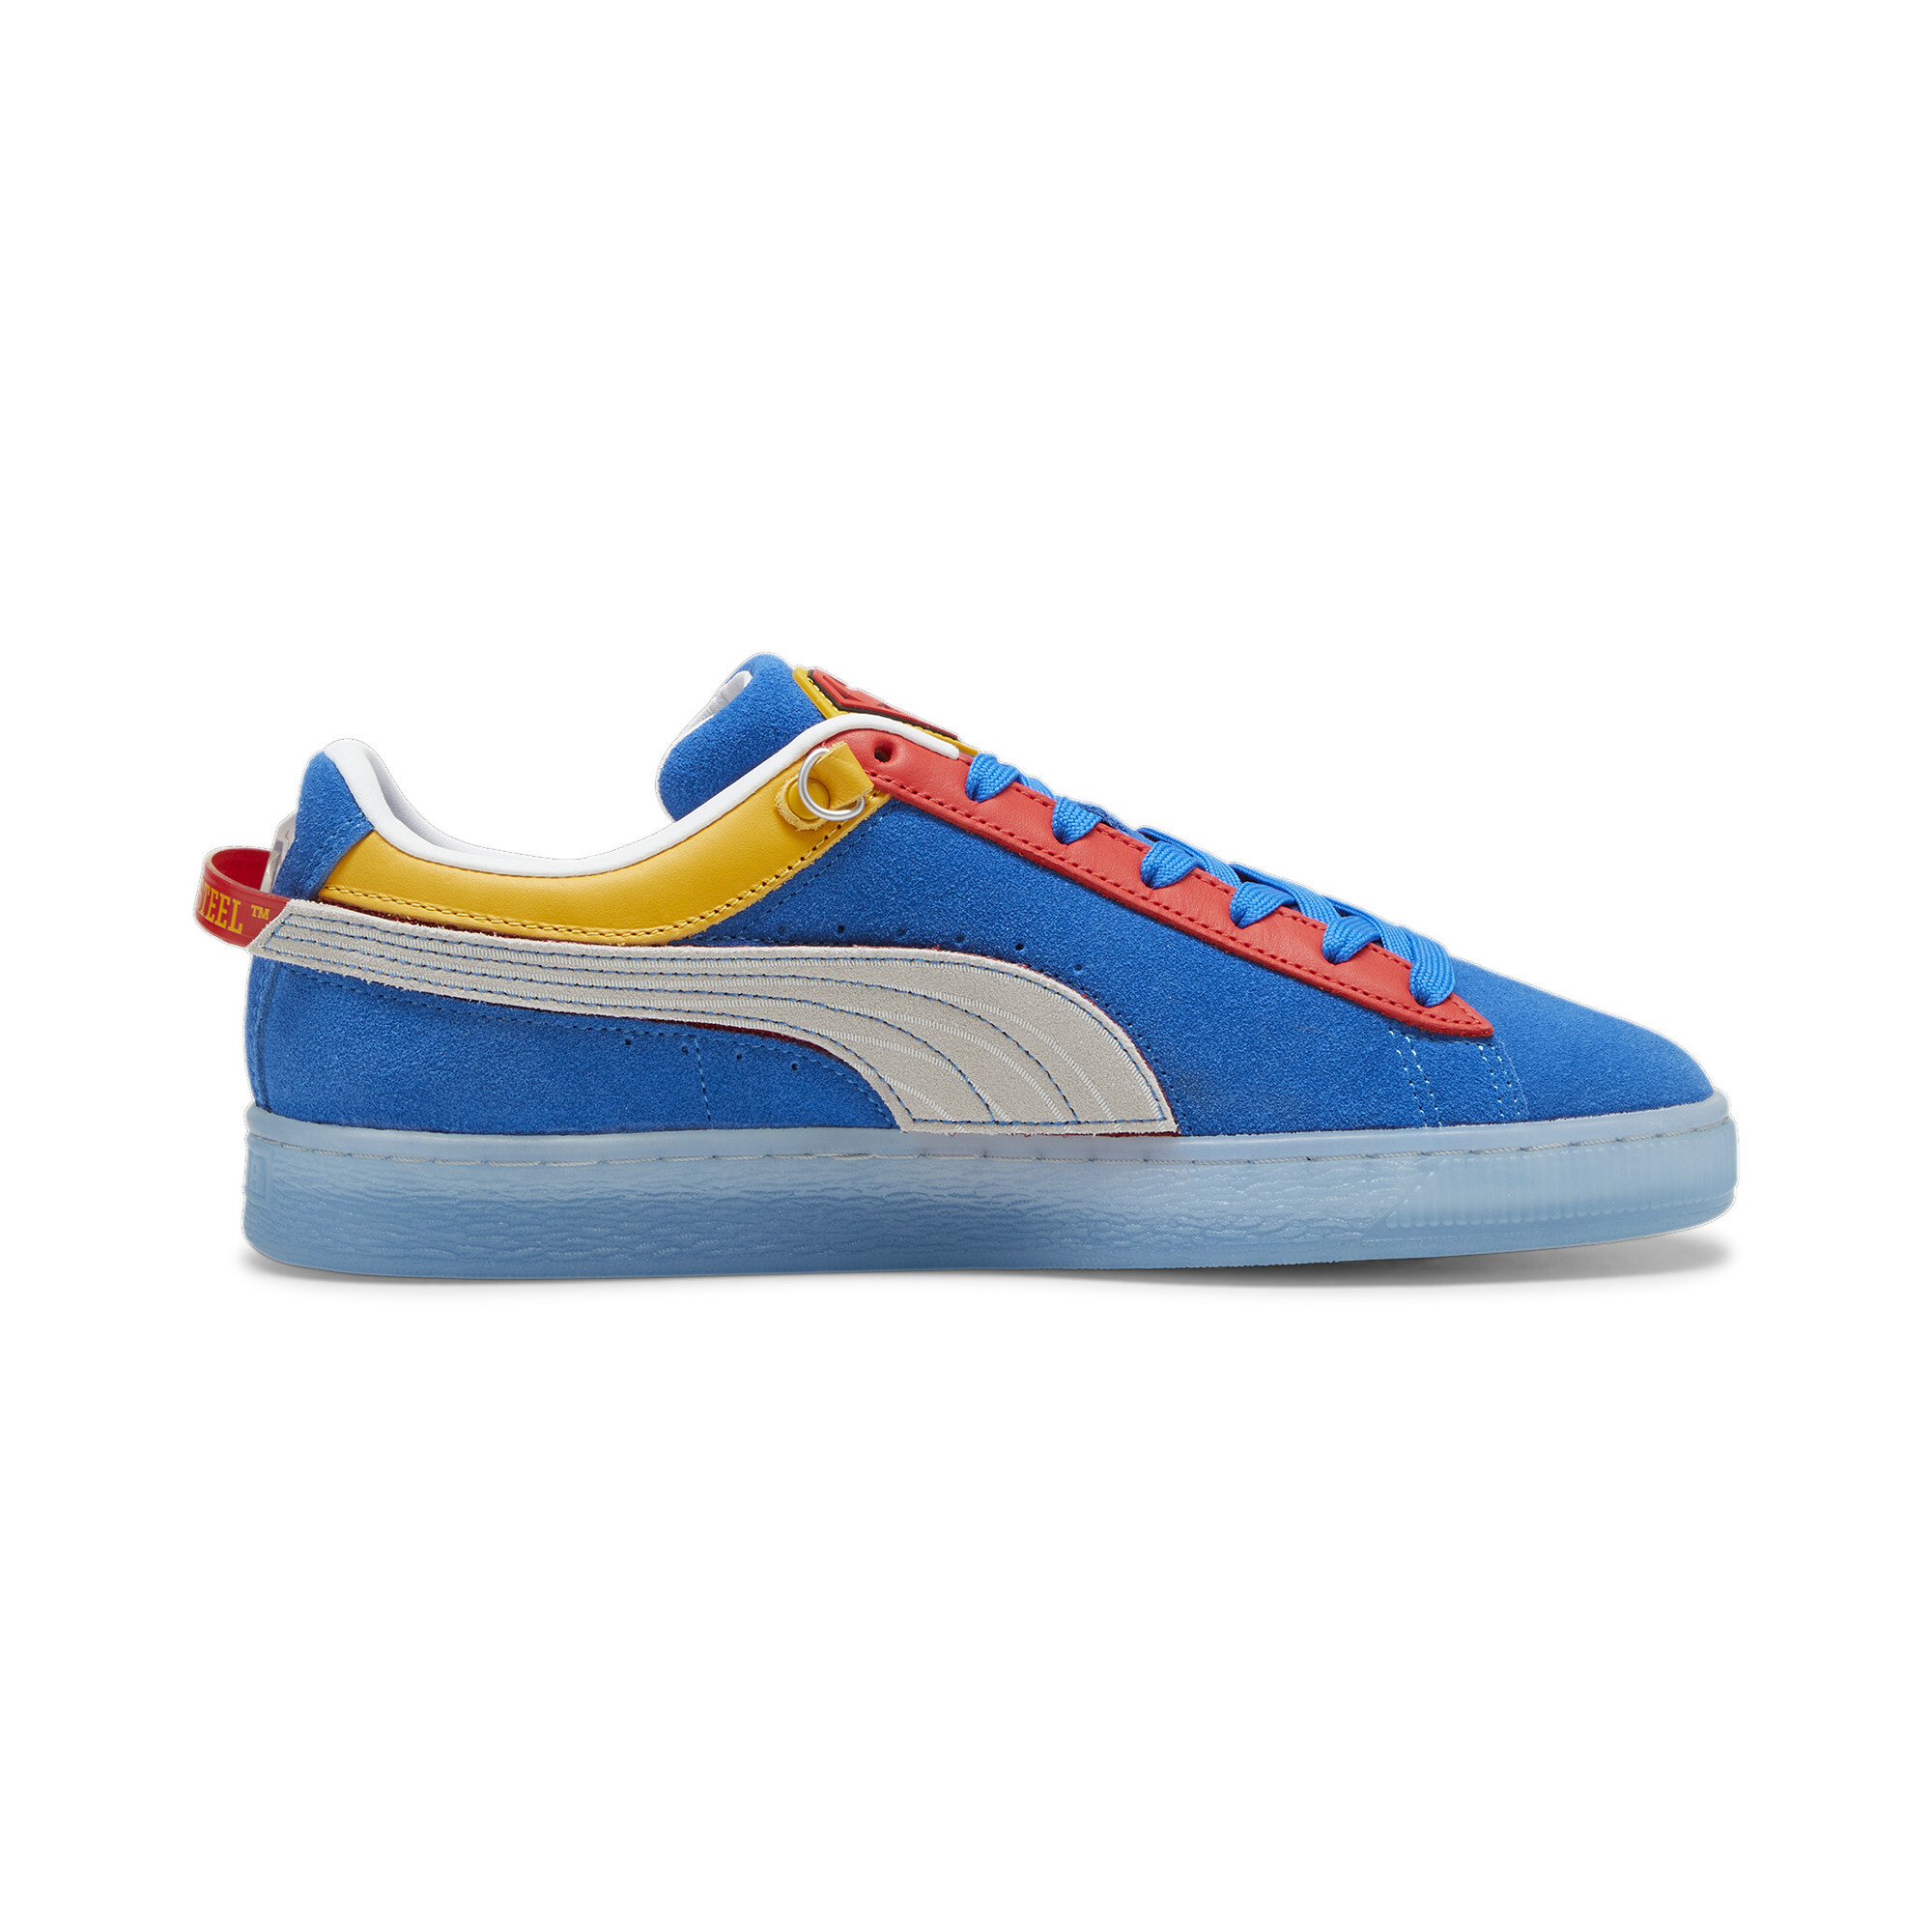 Puma X SUPERMAN 85th Anniversary Suede Sneakers, Blue, Size 37.5, Shoes